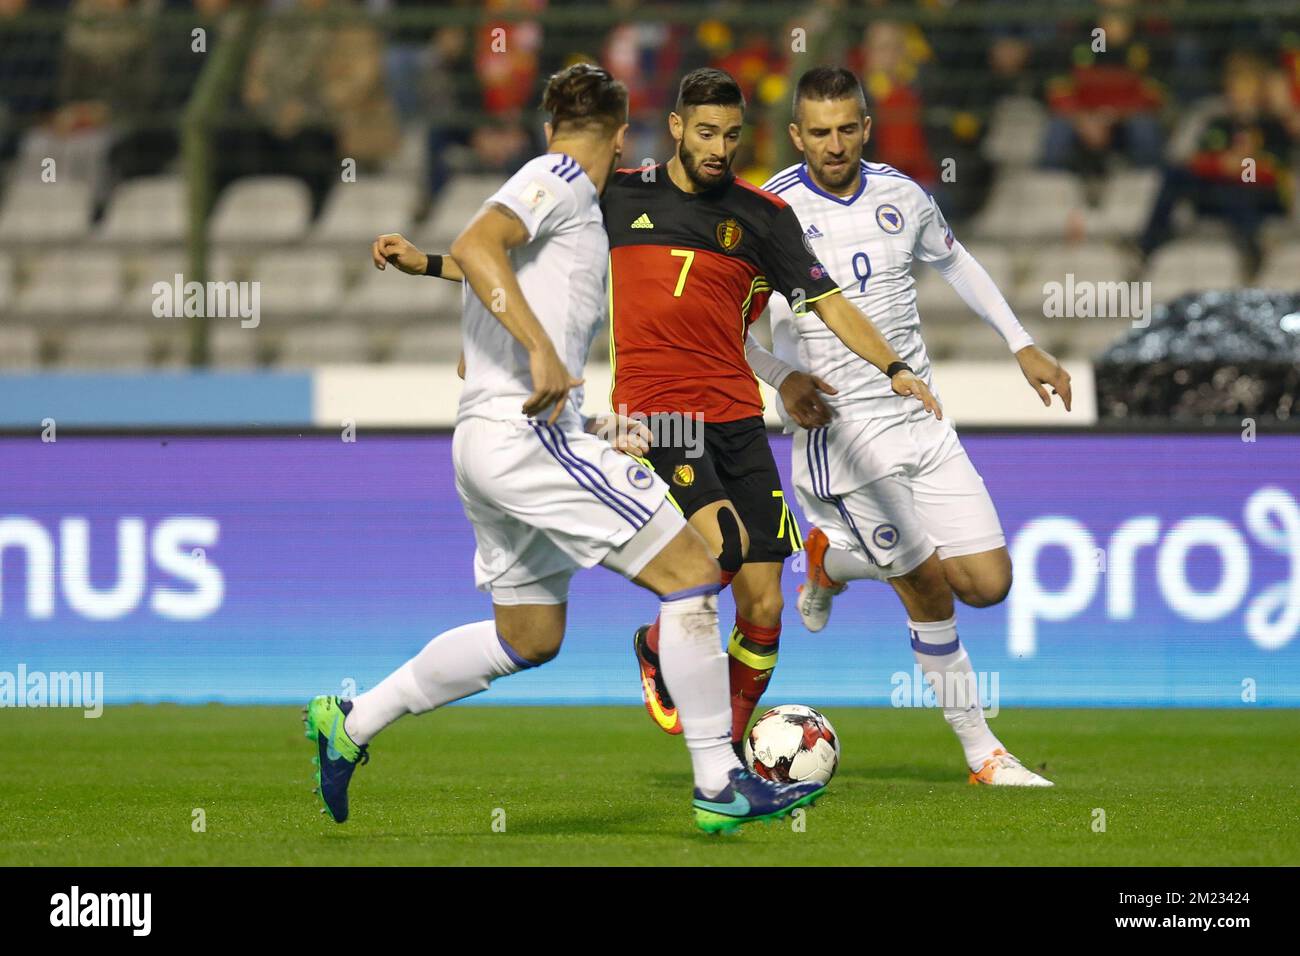 Bosnia's Ermin Bicakcic , Belgium's Yannick Ferreira Carrasco and Bosnia's Vedad Ibisevic fight for the ball during a soccer match between Belgium's Red Devils and Bosnia and Herzegovina, the second World Championships 2018 Qualification game in Group H, on Friday 07 October 2016, in Brussels. BELGA PHOTO BRUNO FAHY Stock Photo